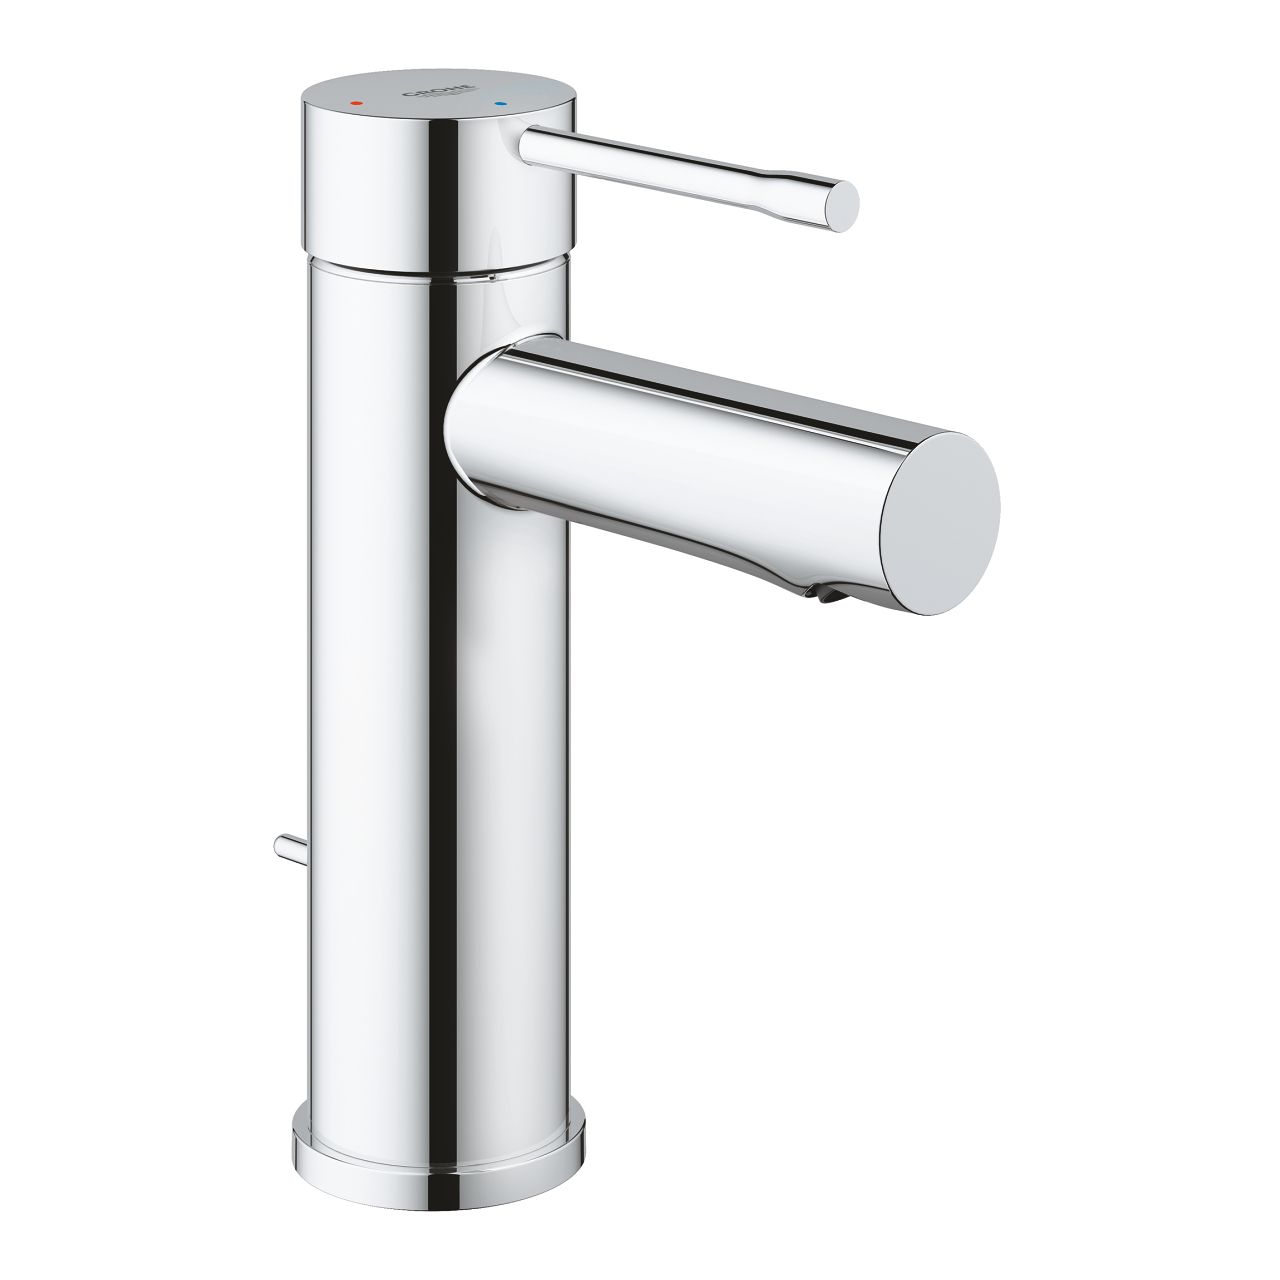  Grohe Essence Single-lever basin mixer S-Size - 23379001 